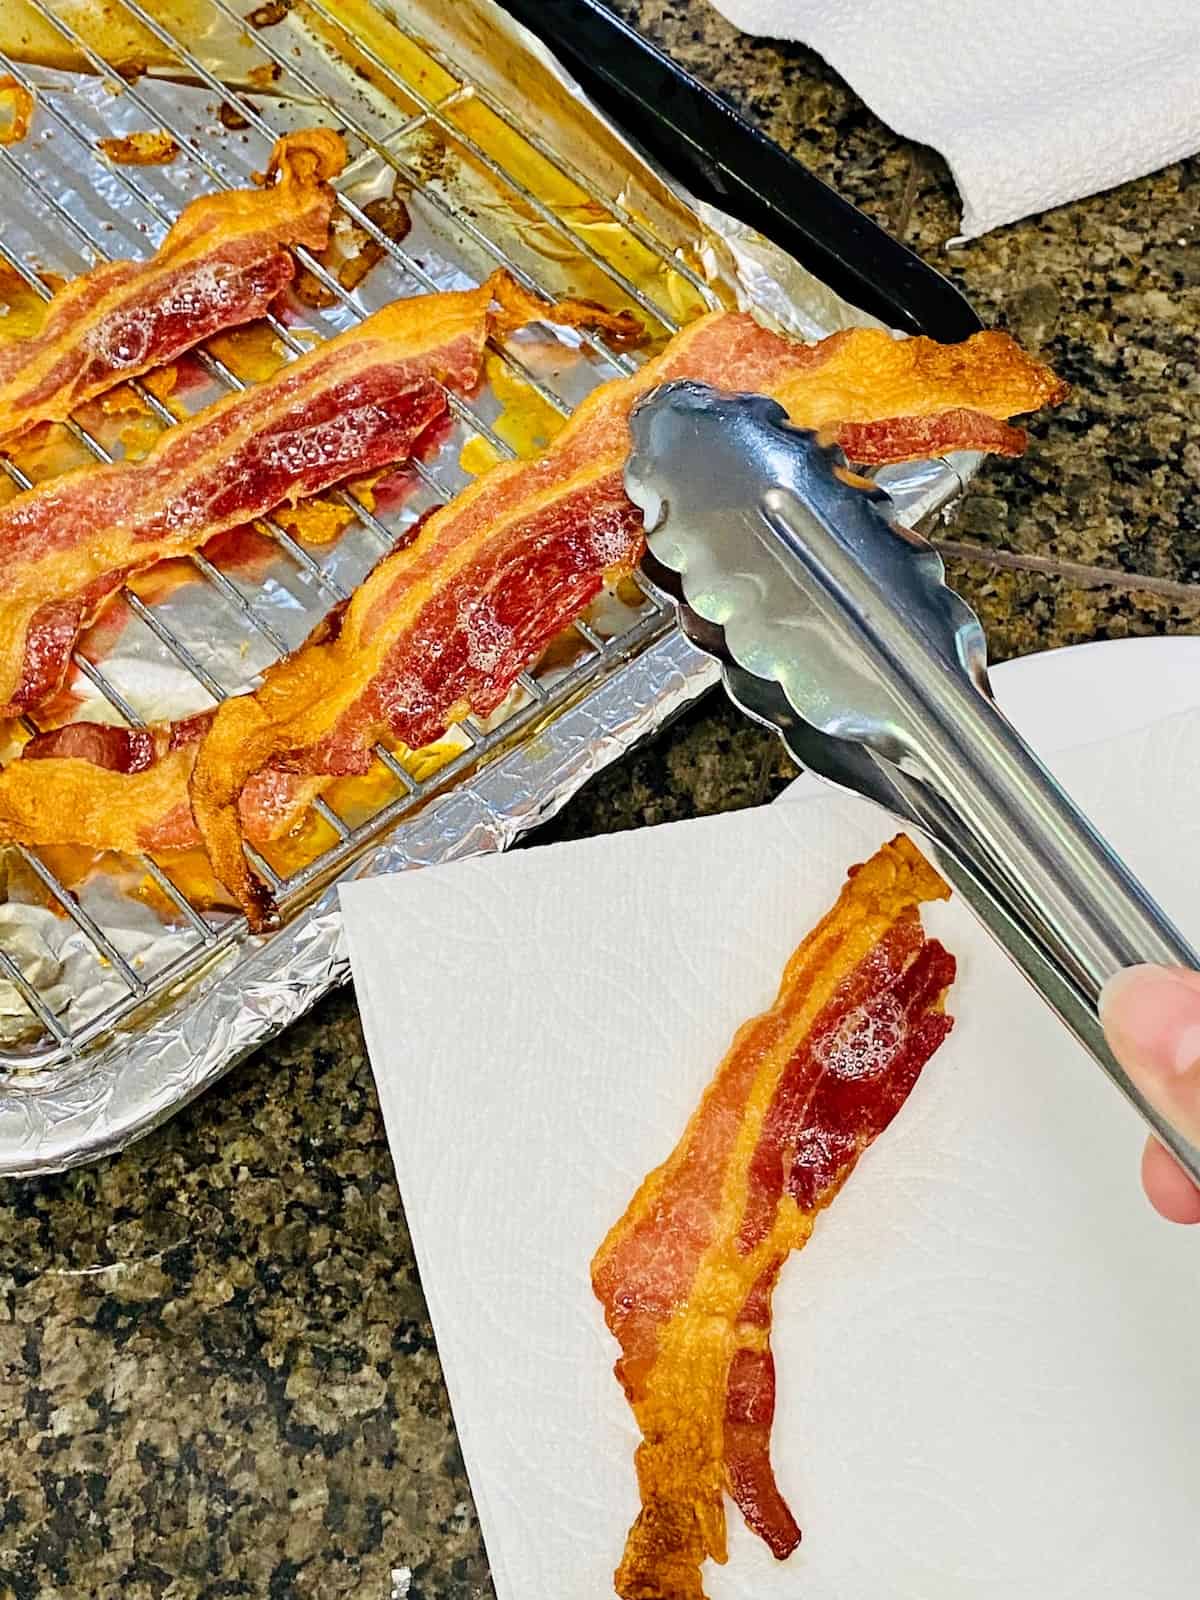 Tongs placing bacon on paper towels.